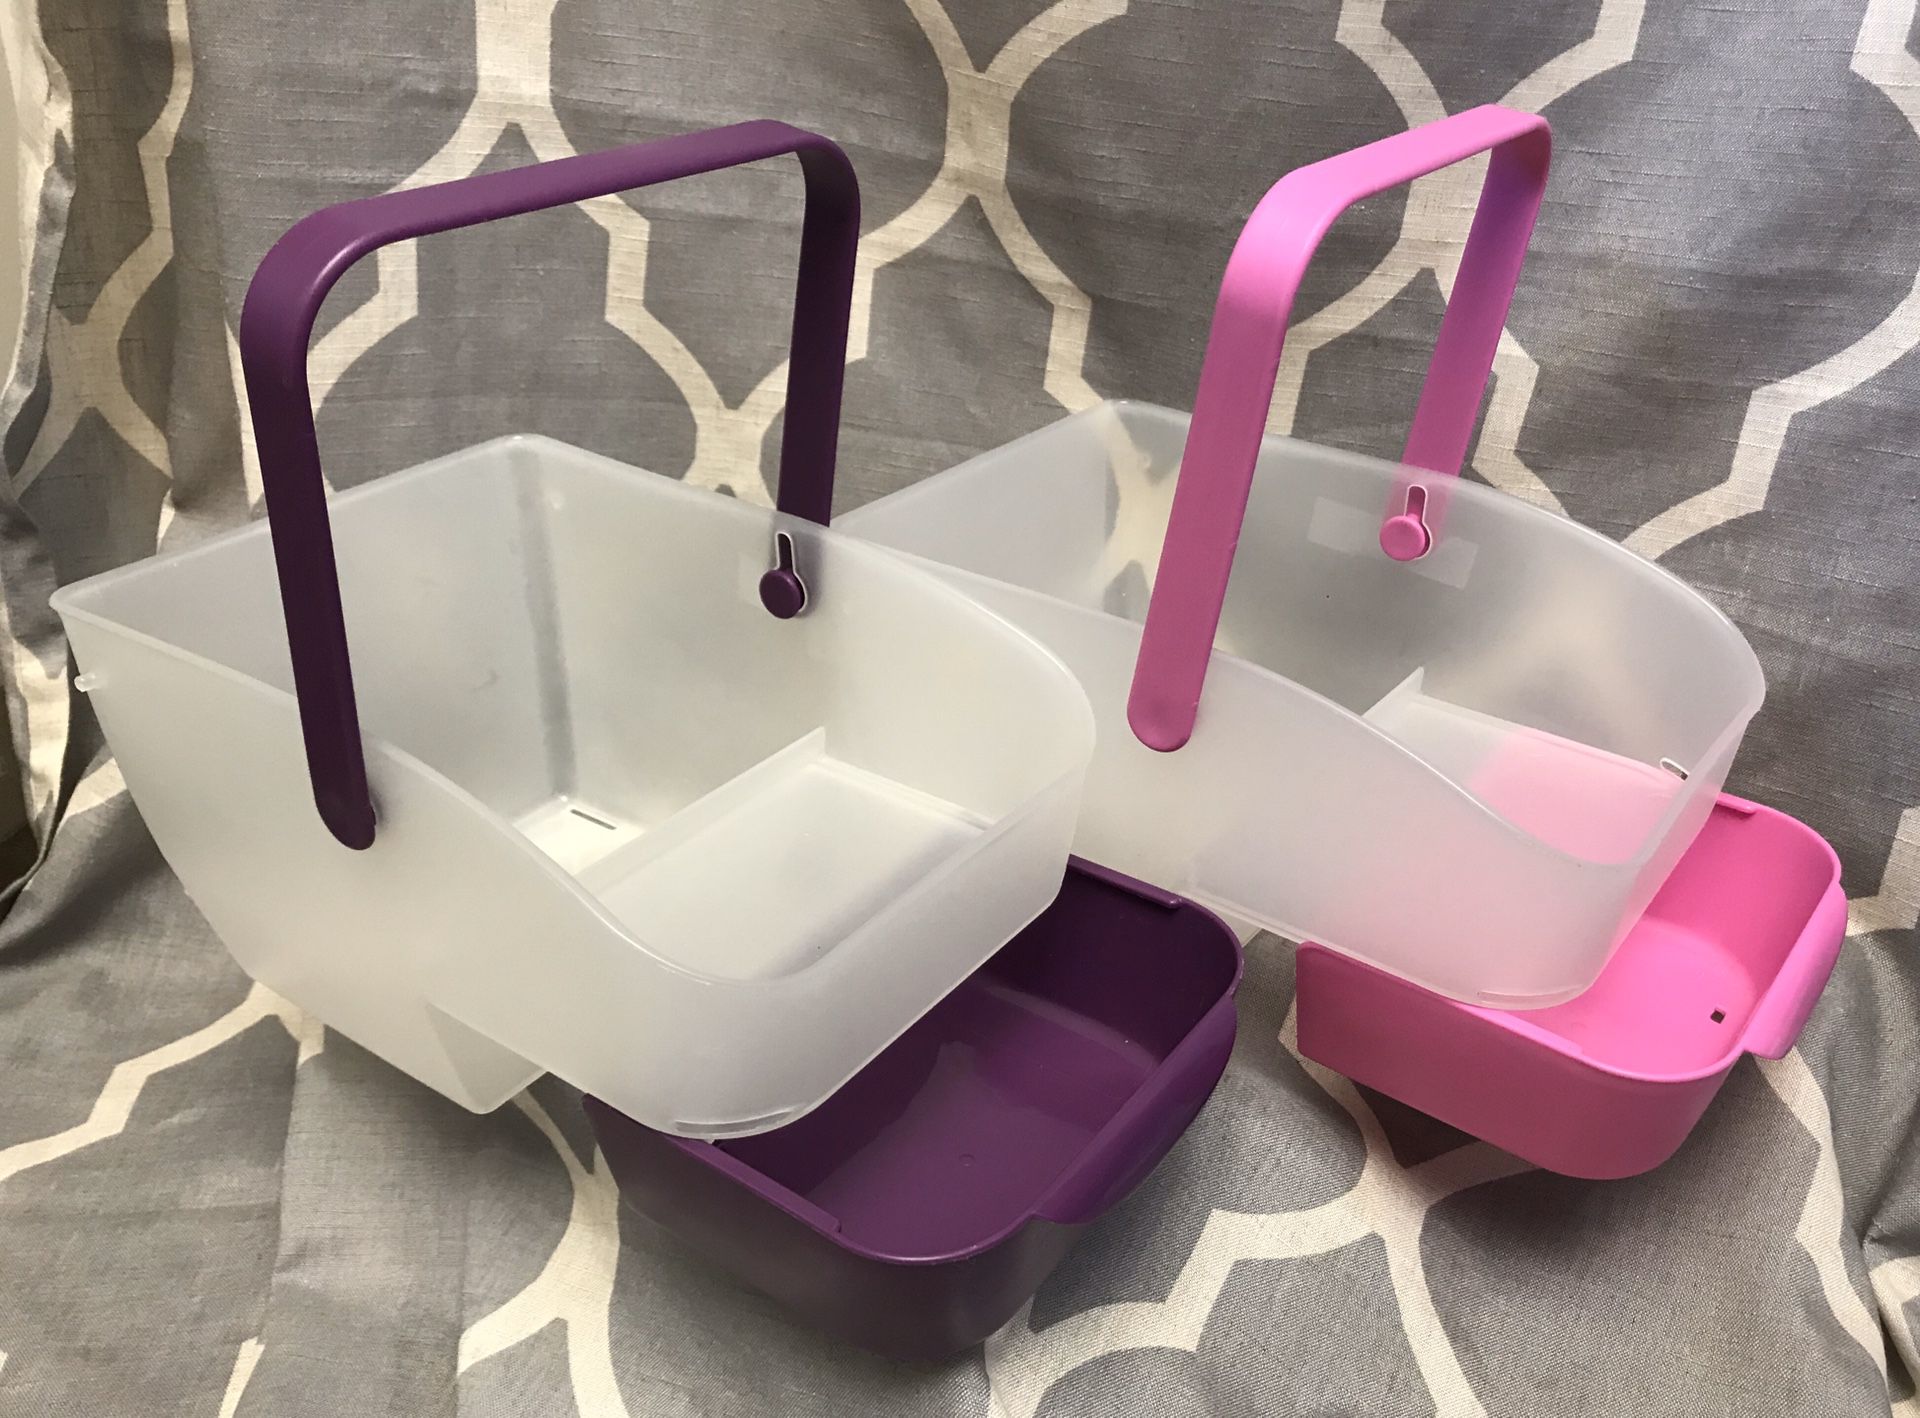 2 Plastic Organizing Caddy with drawer *$10 FOR BOTH*